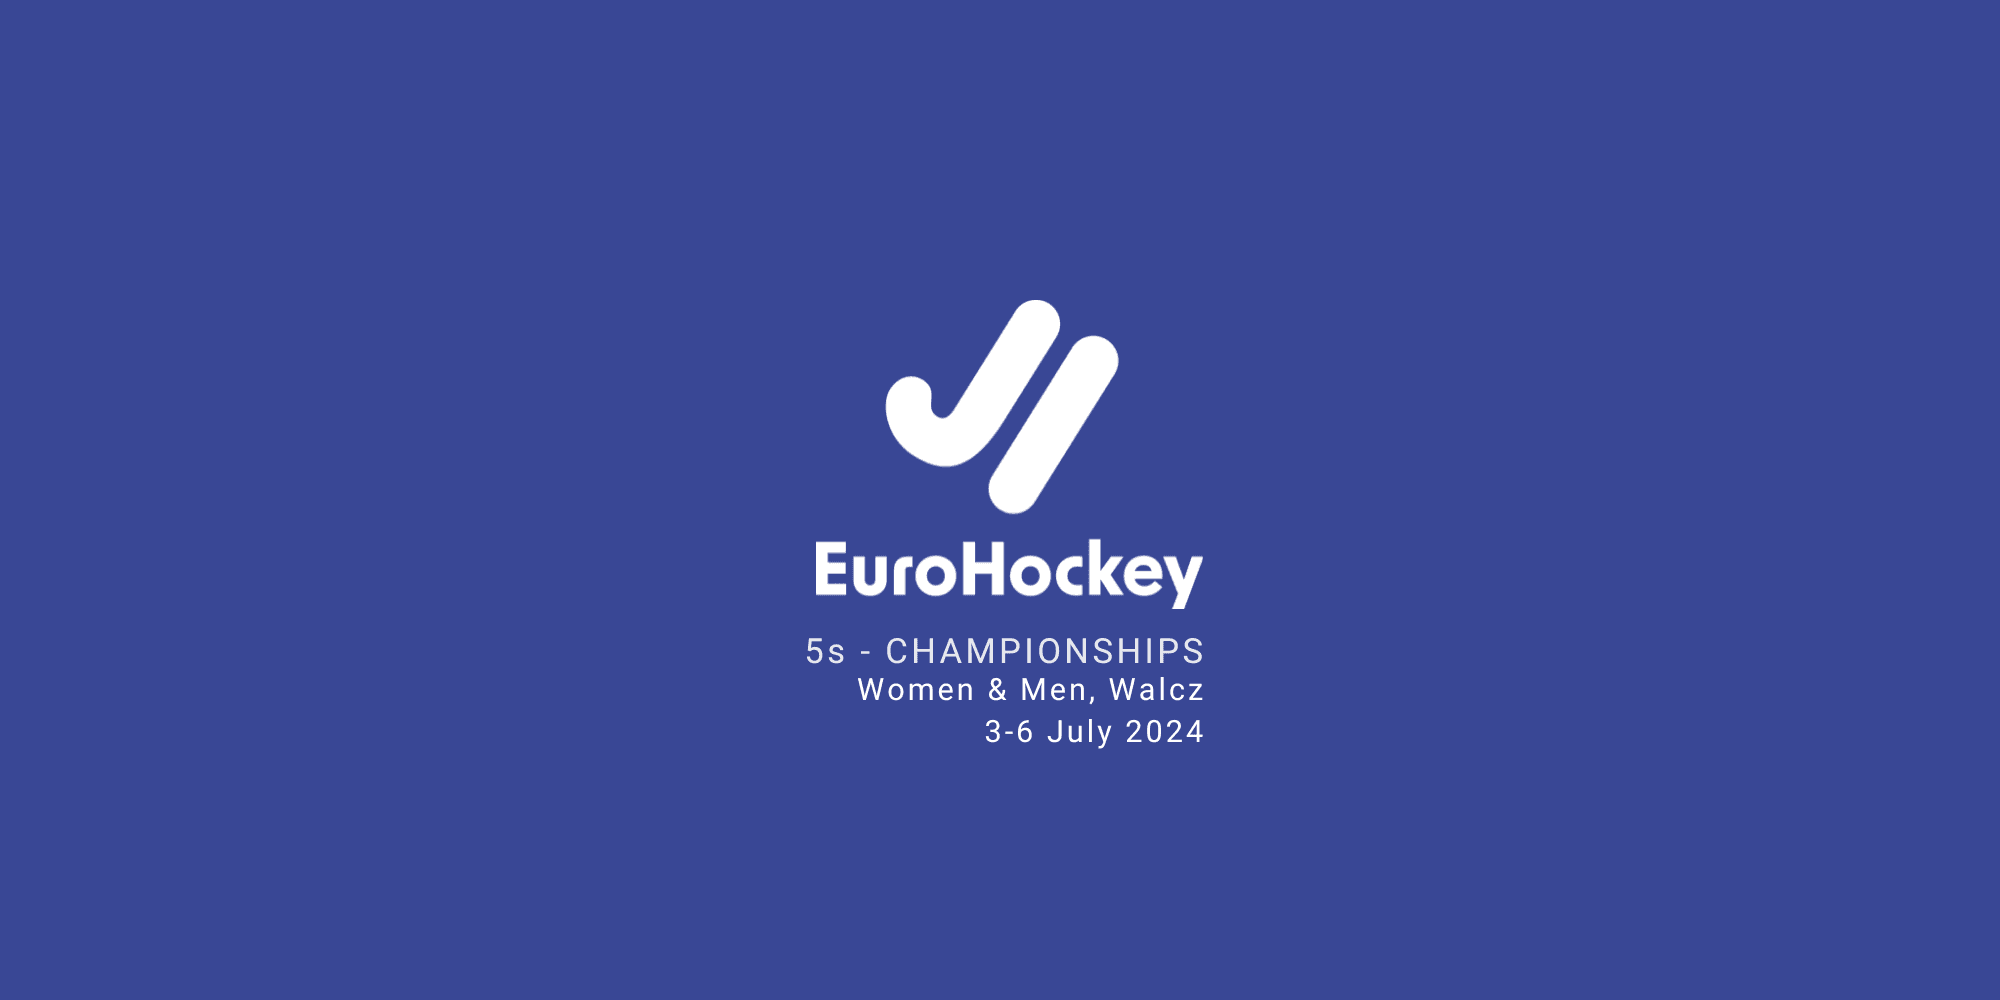 New champion set to be crowned at men’s EuroHockey 5s in Poland